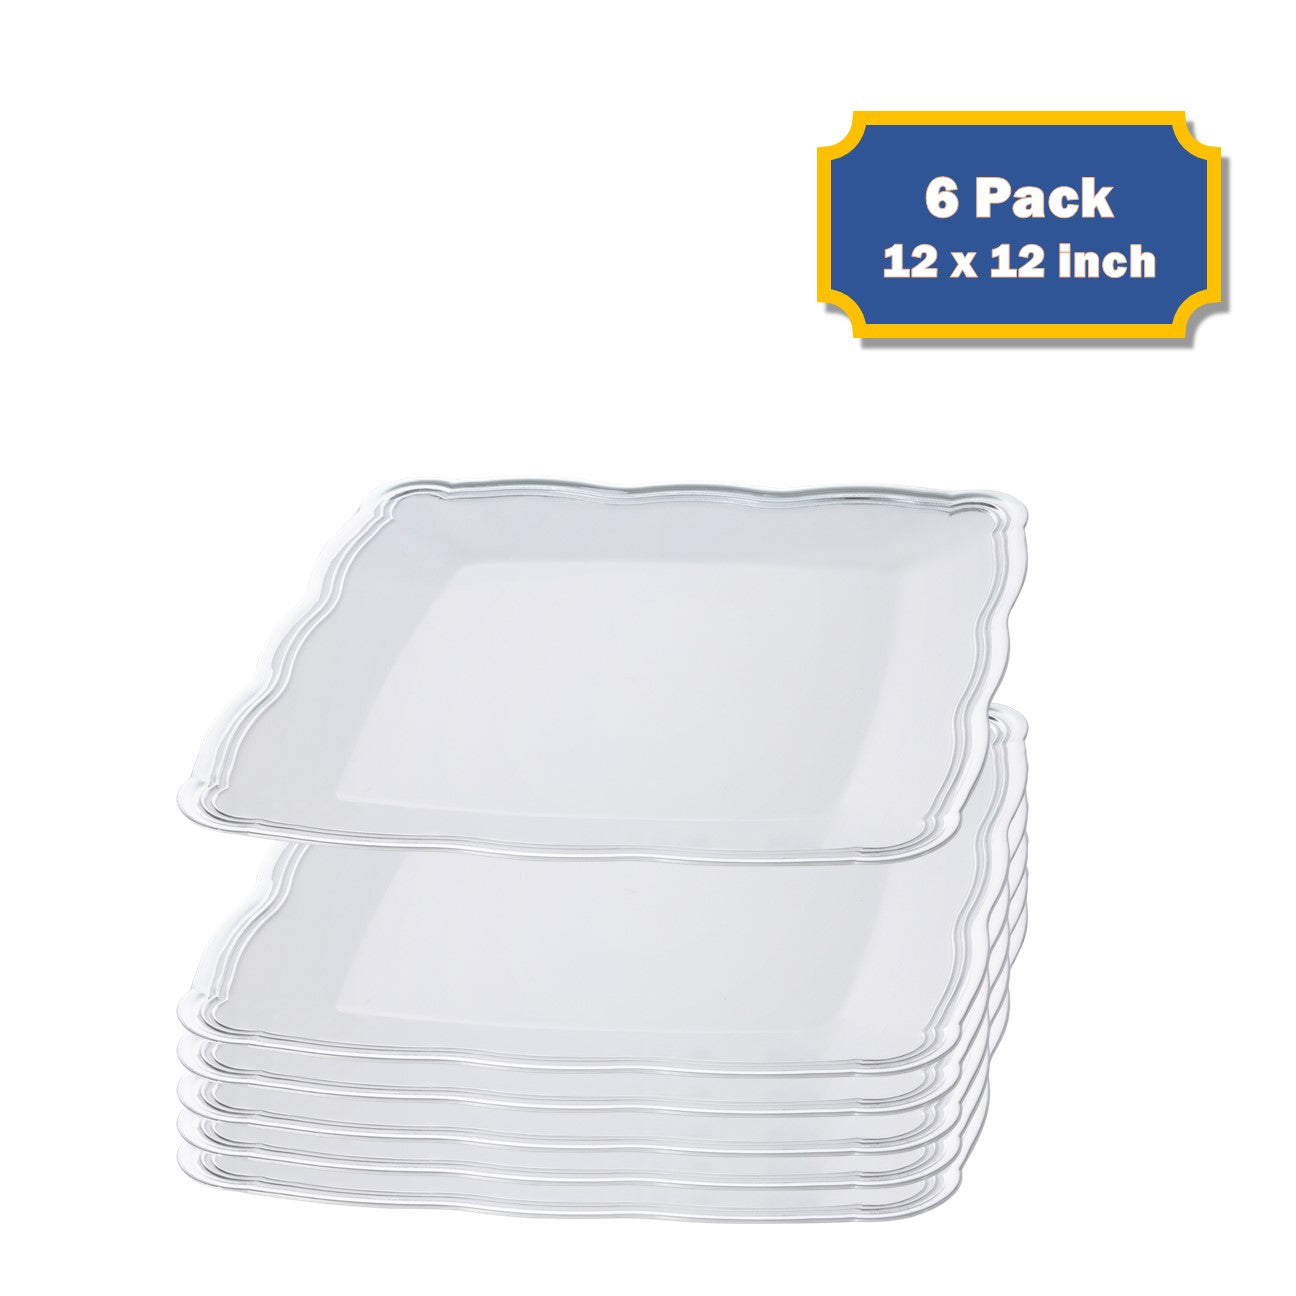 9 X 13 Inch Rectangle White and Silver Rim Plastic Serving Tray